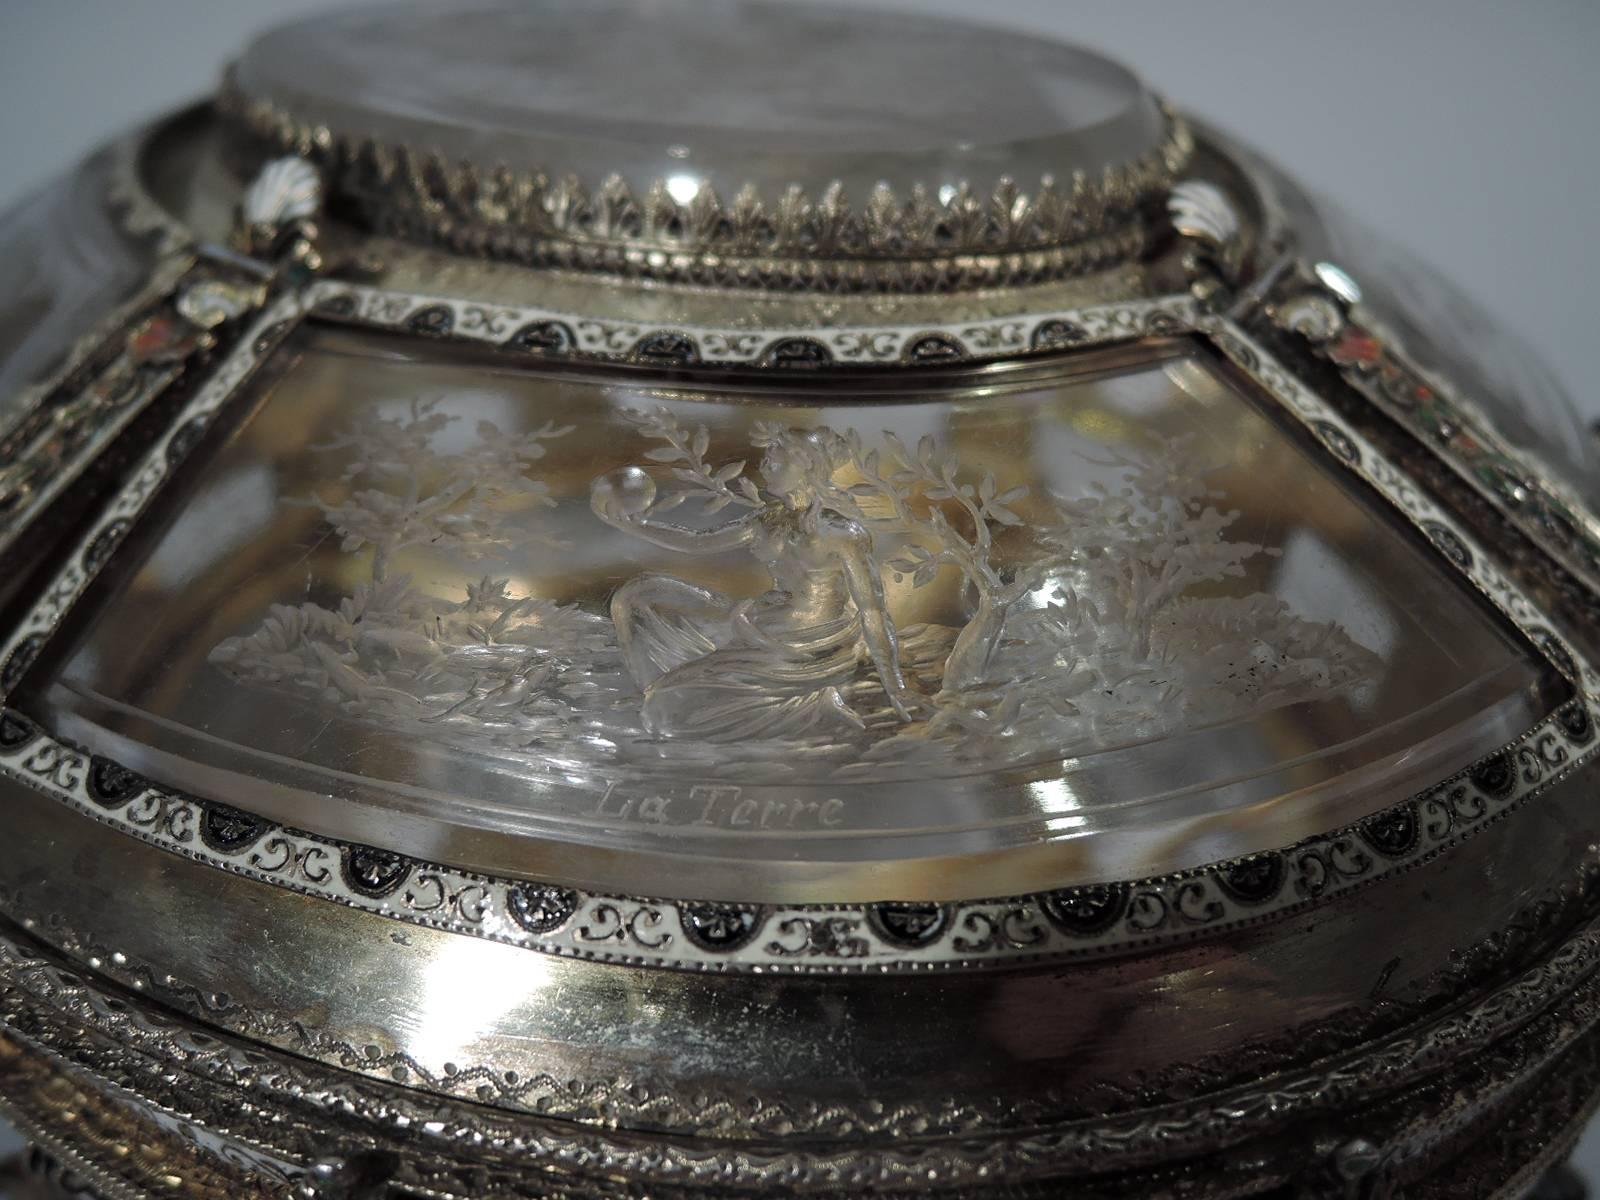 19th Century Antique Viennese Silver Gilt and Rock Crystal Casket with Astrological Symbols